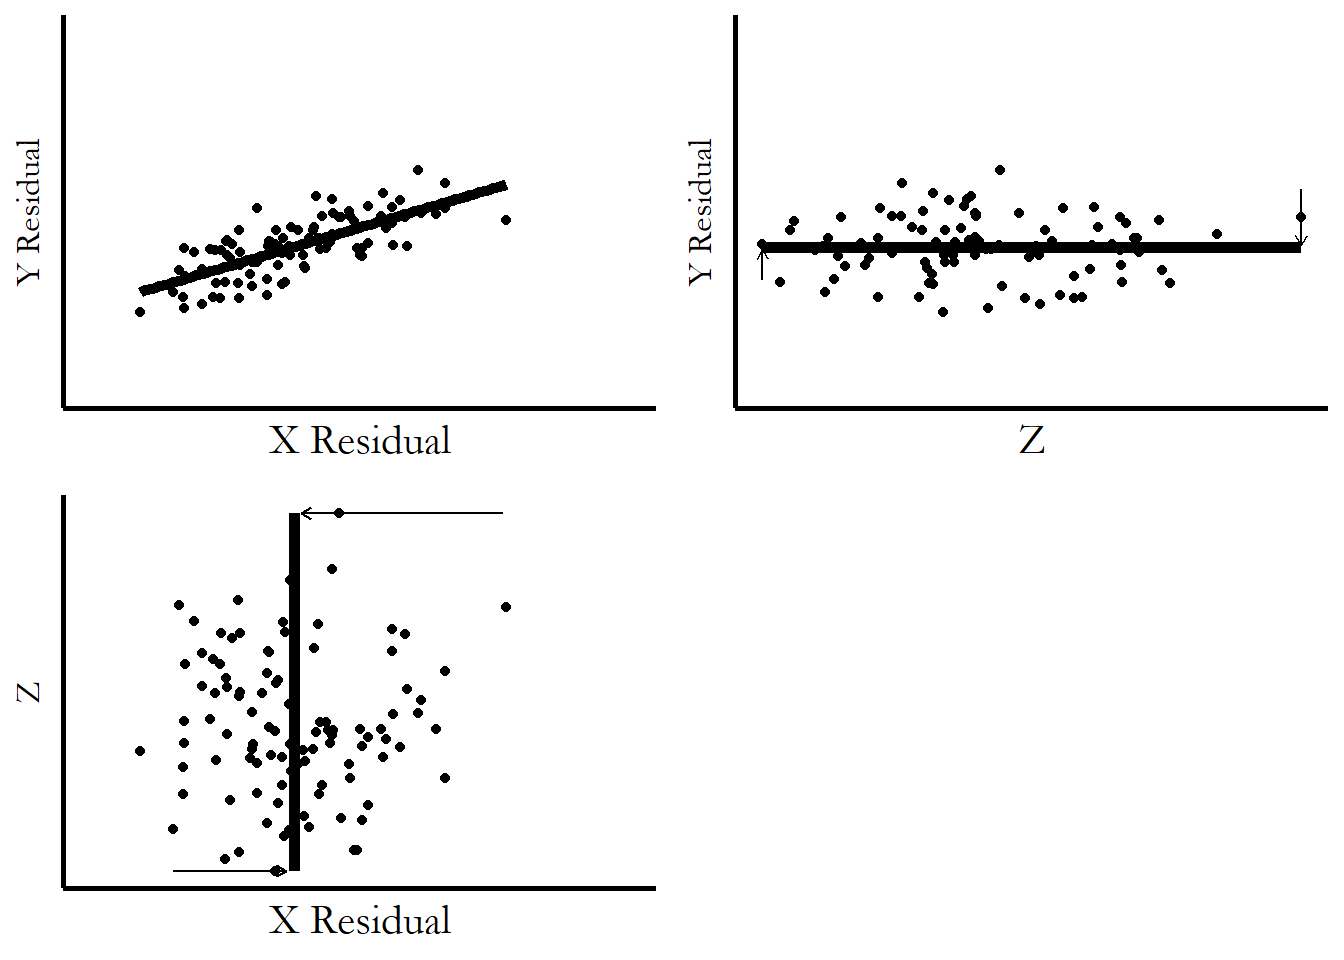 A set of three scatterplots with overlaid best-fit lines, each showing the relationship between Y and X, between Y and Z, and between X and Z, respectively, but wiht all the Y-Z and X-Z variation removed, to demonstrate how regression with a control works